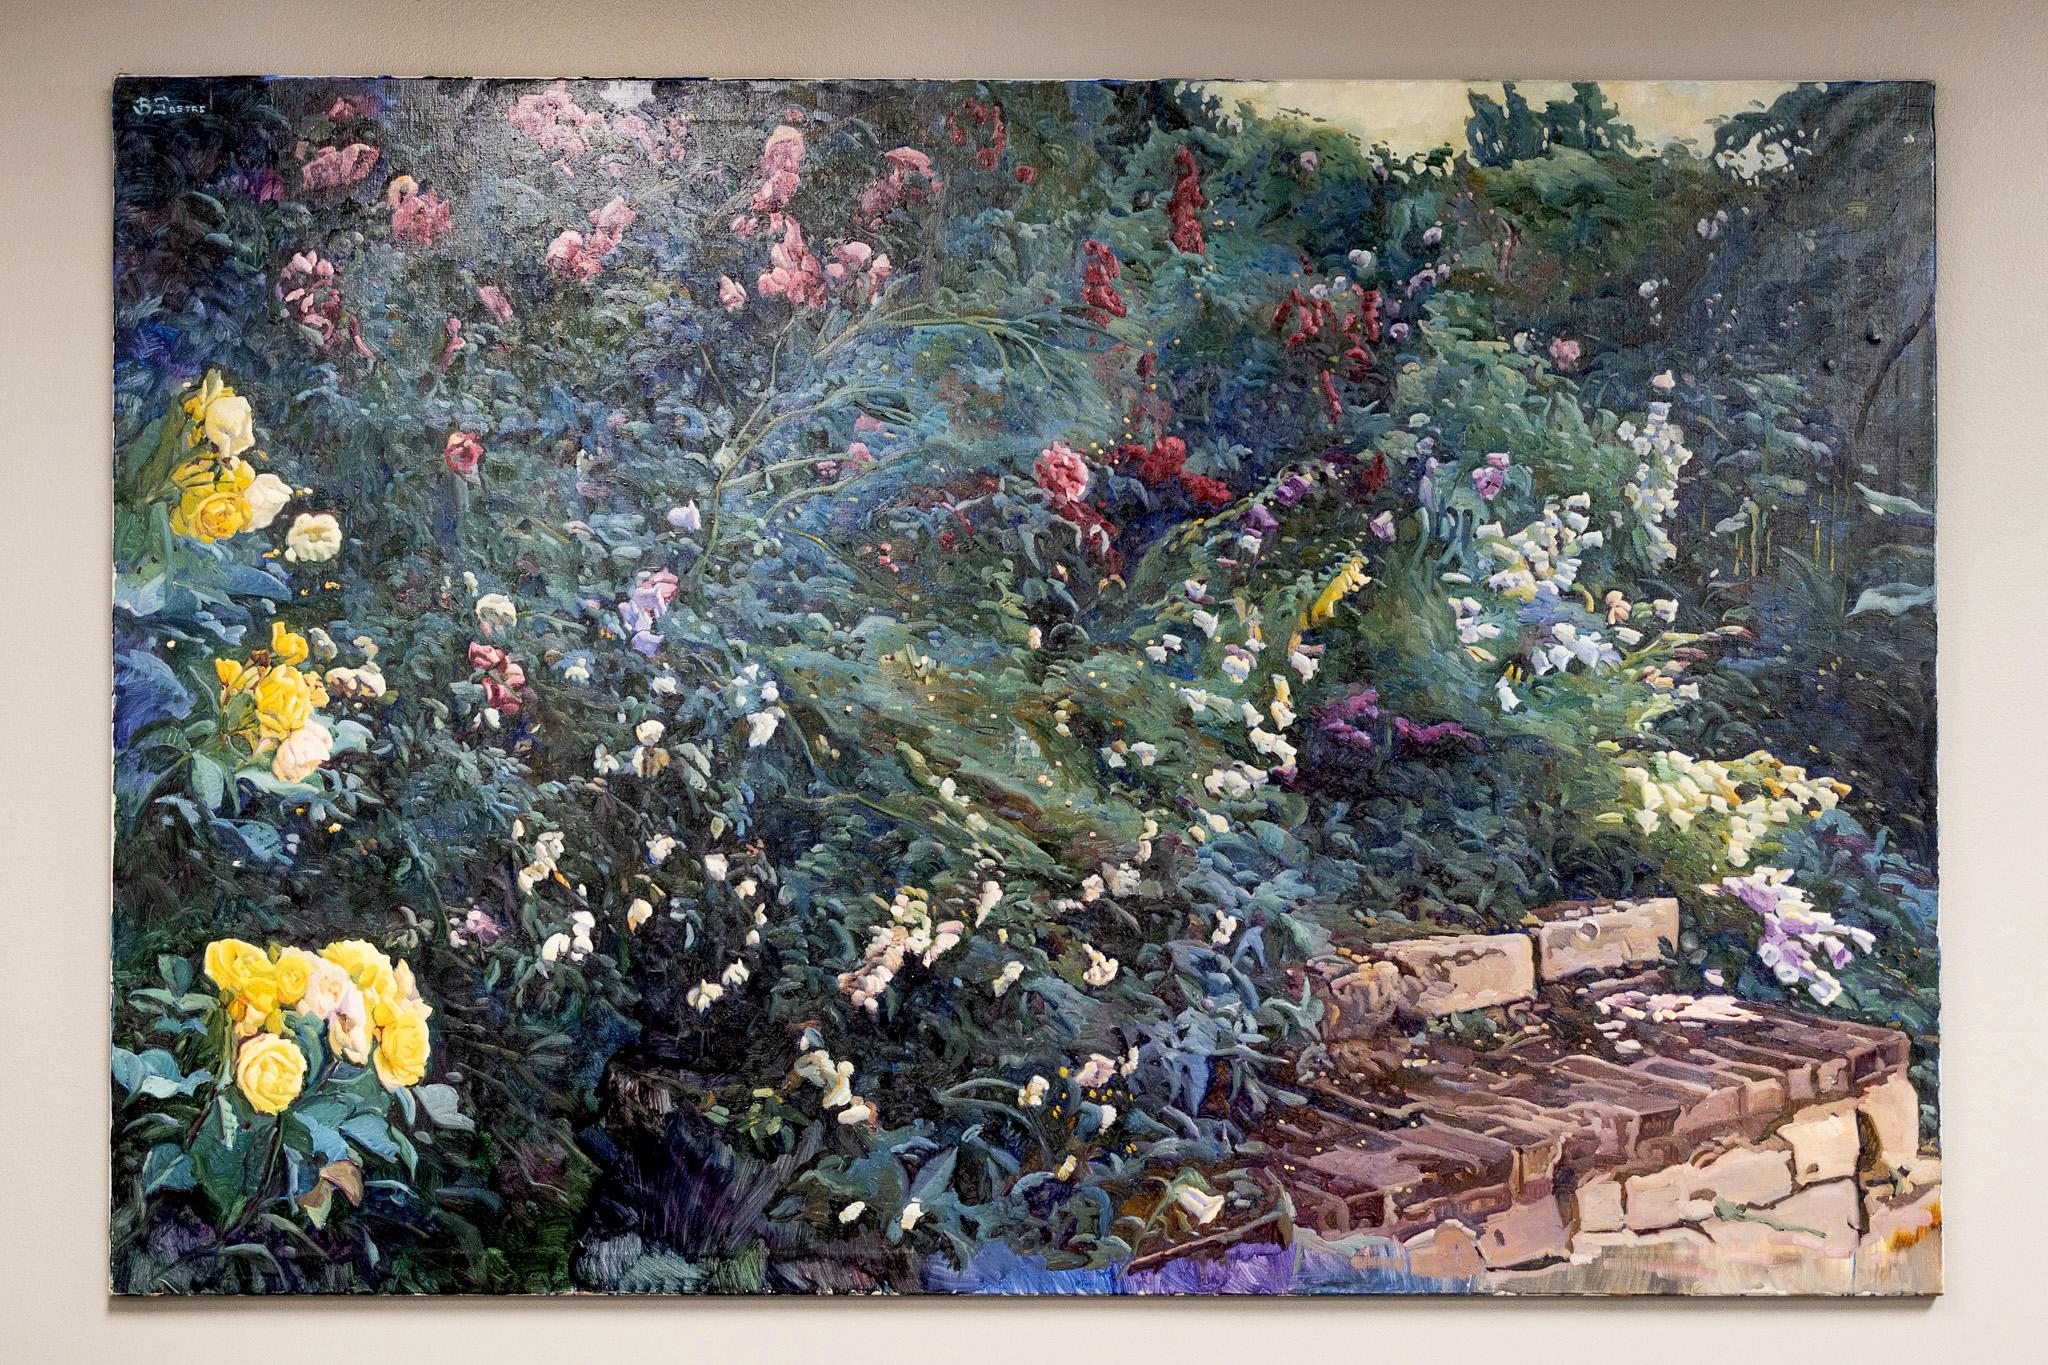 By Bartolome Sastre
This vast and stunning floral scene depicts a wall of flowering plants with pink, purple, red, and yellow petals. The impressionist style gives the flowerbed a sense of movement, almost like a waterfall. Brown stone steps peak